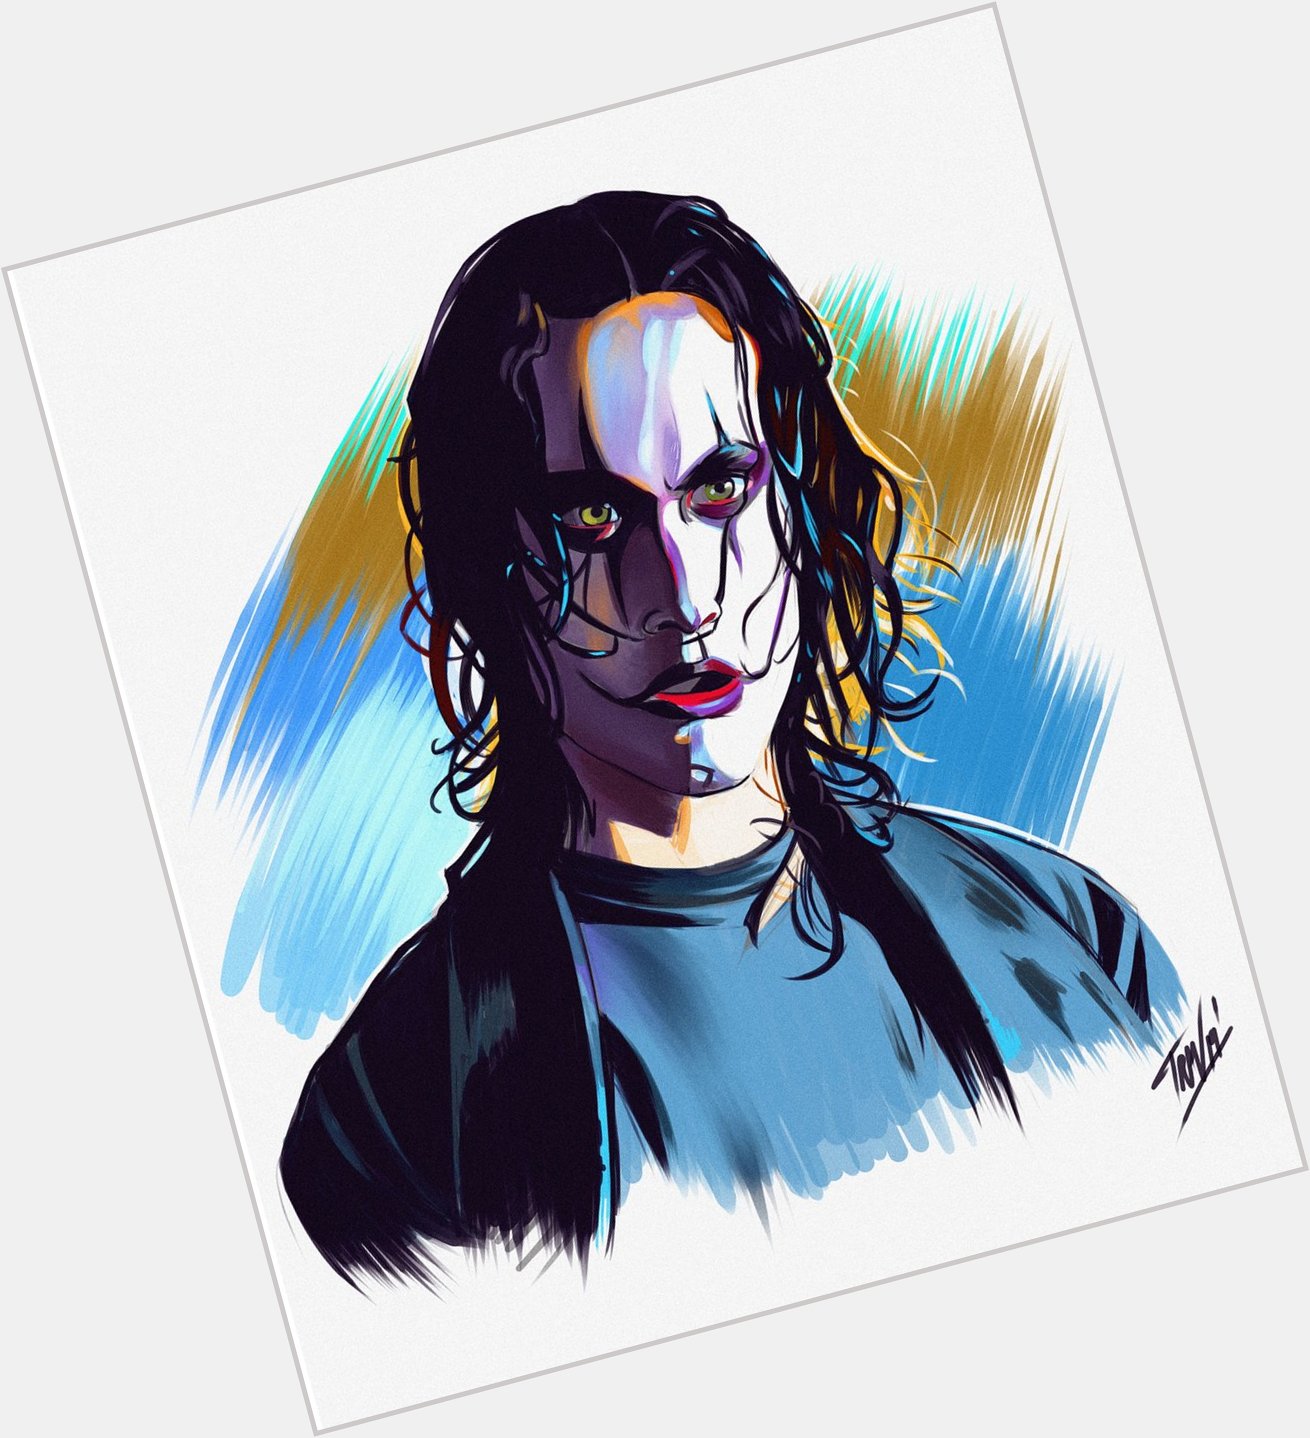 Happy Birthday Brandon Lee.
Today he would have turned 55.

RIP

(art c. 2019) 